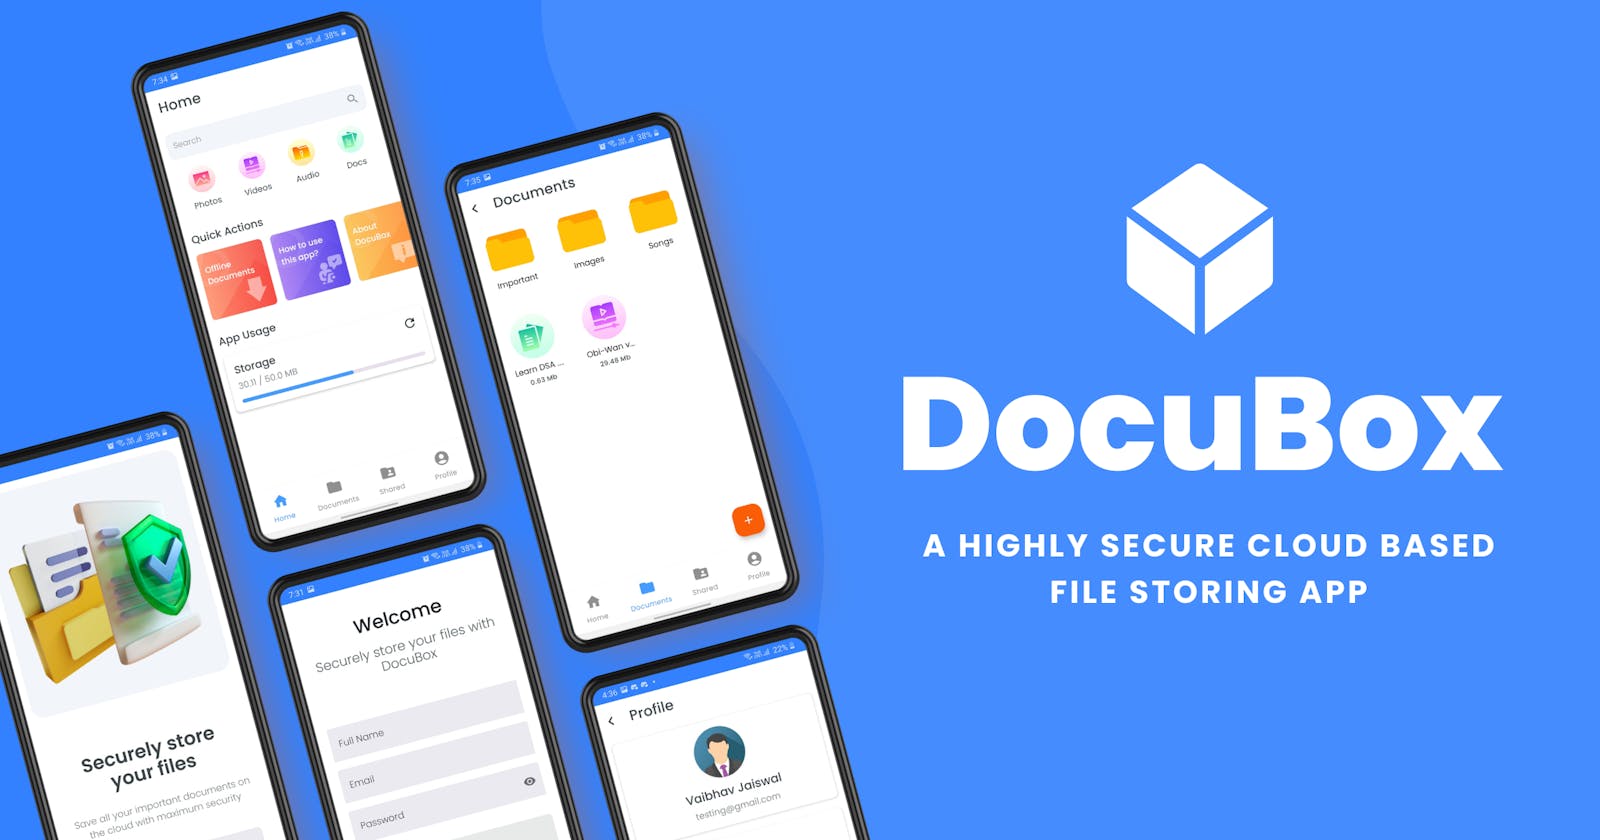 DocuBox: Securely store, access and share your files on cloud